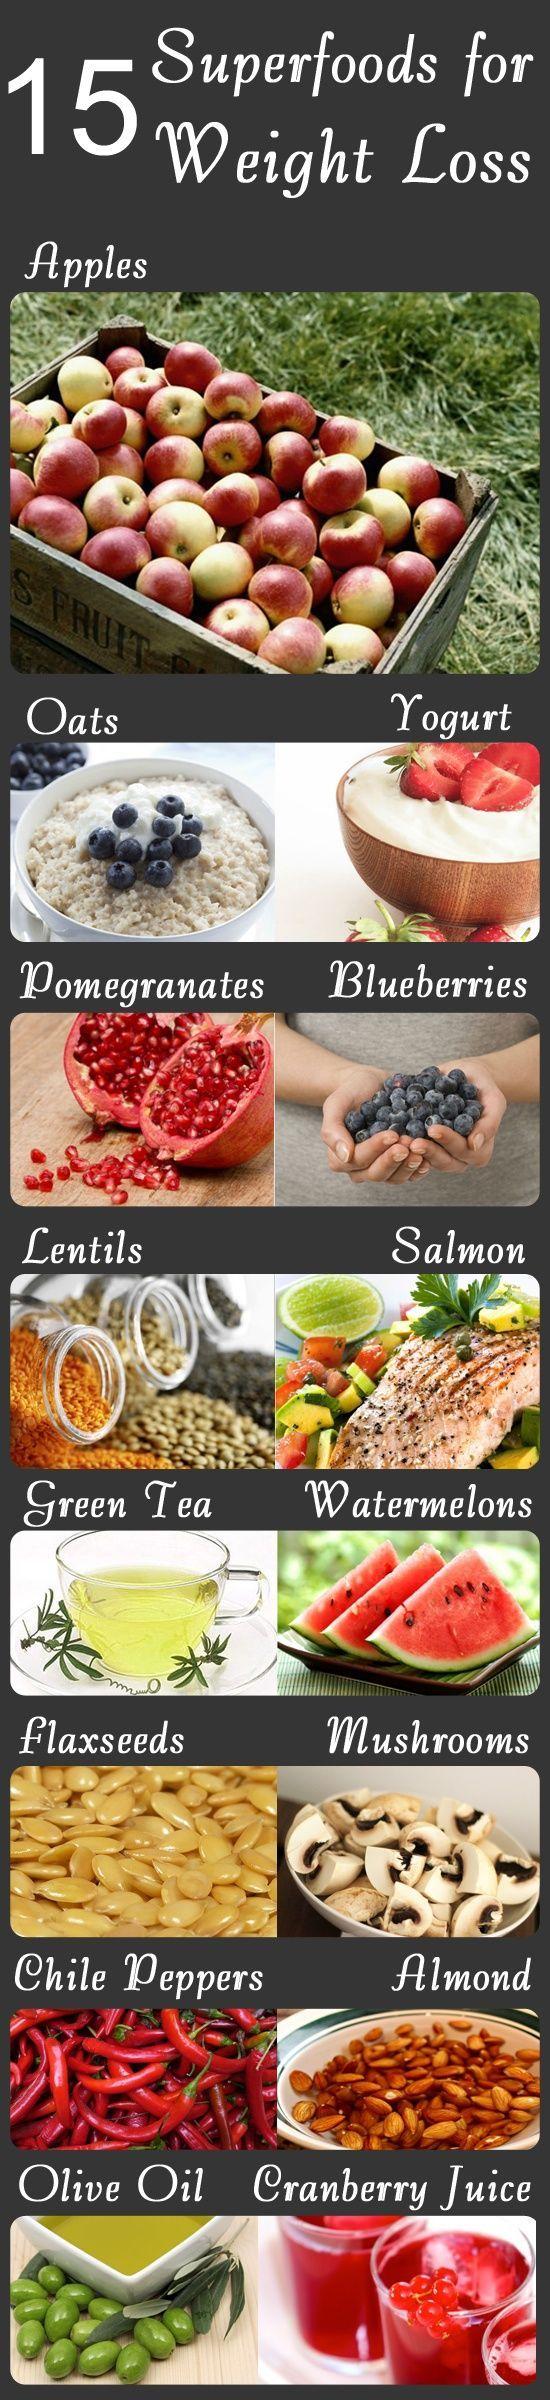 Wedding - 15 Superfoods For Weight Loss